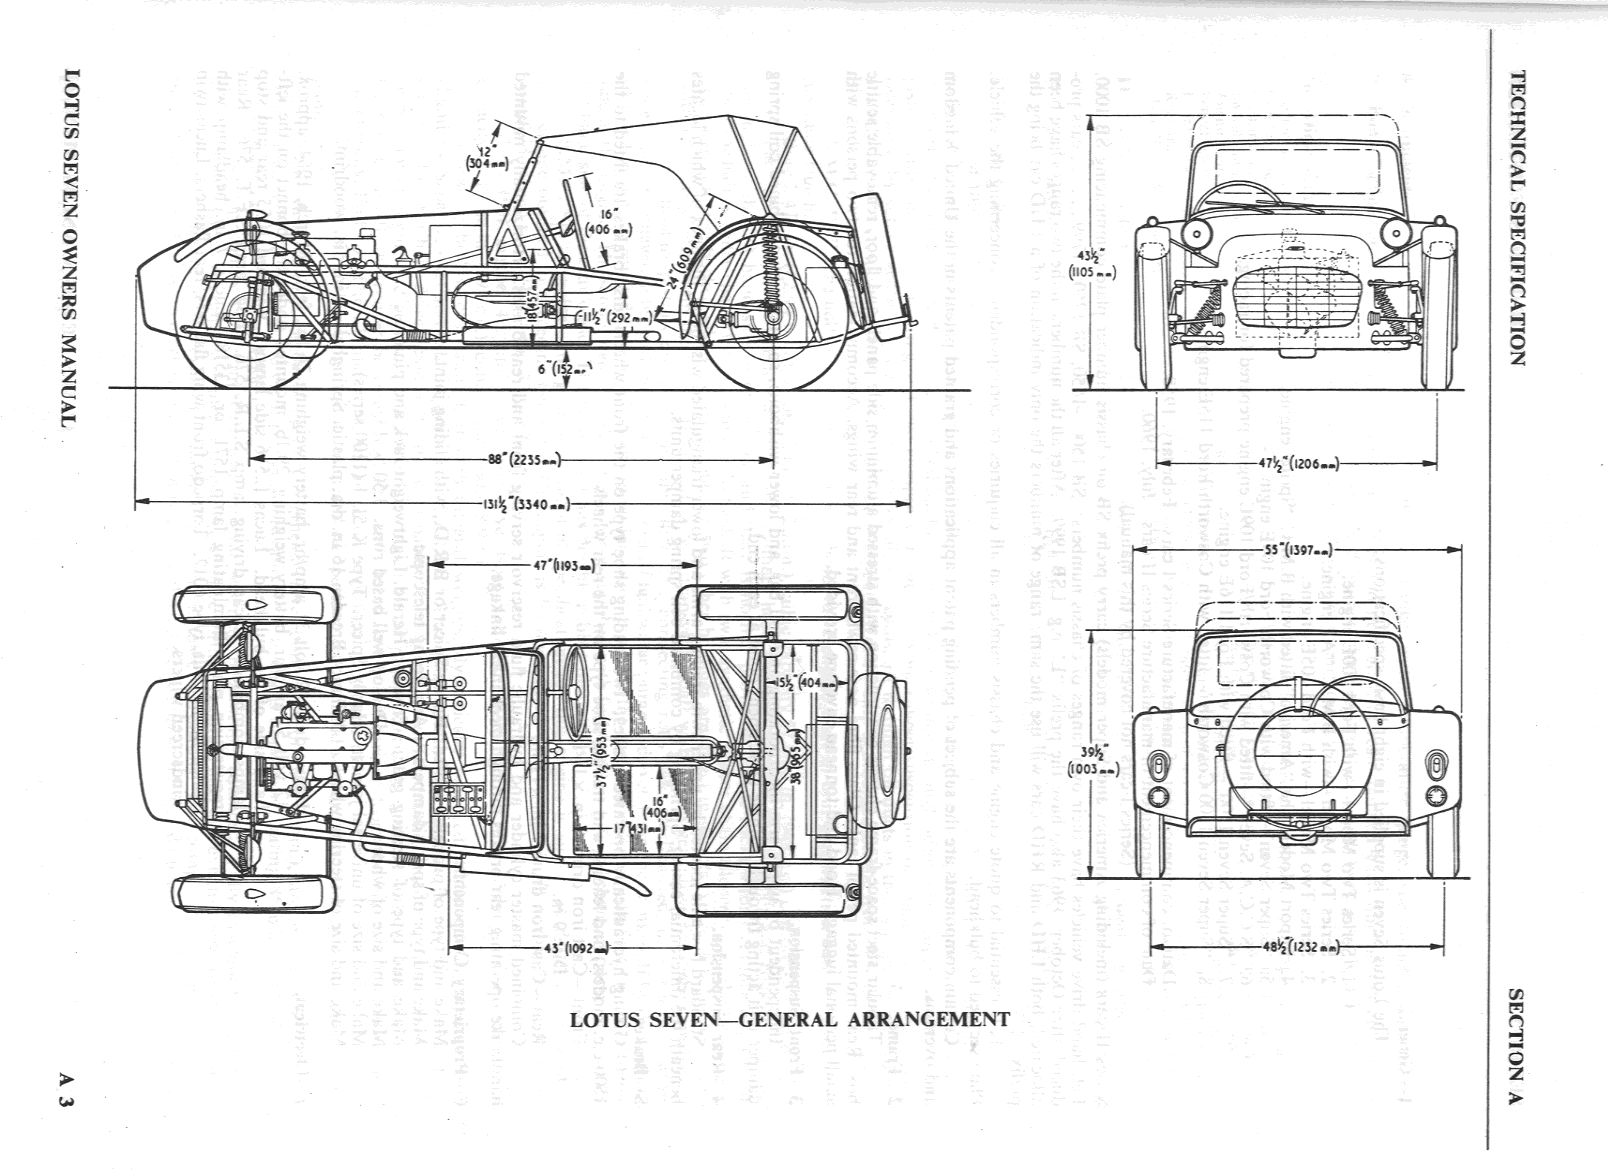 caterham frame - group picture, image by tag - keywordpictures.com